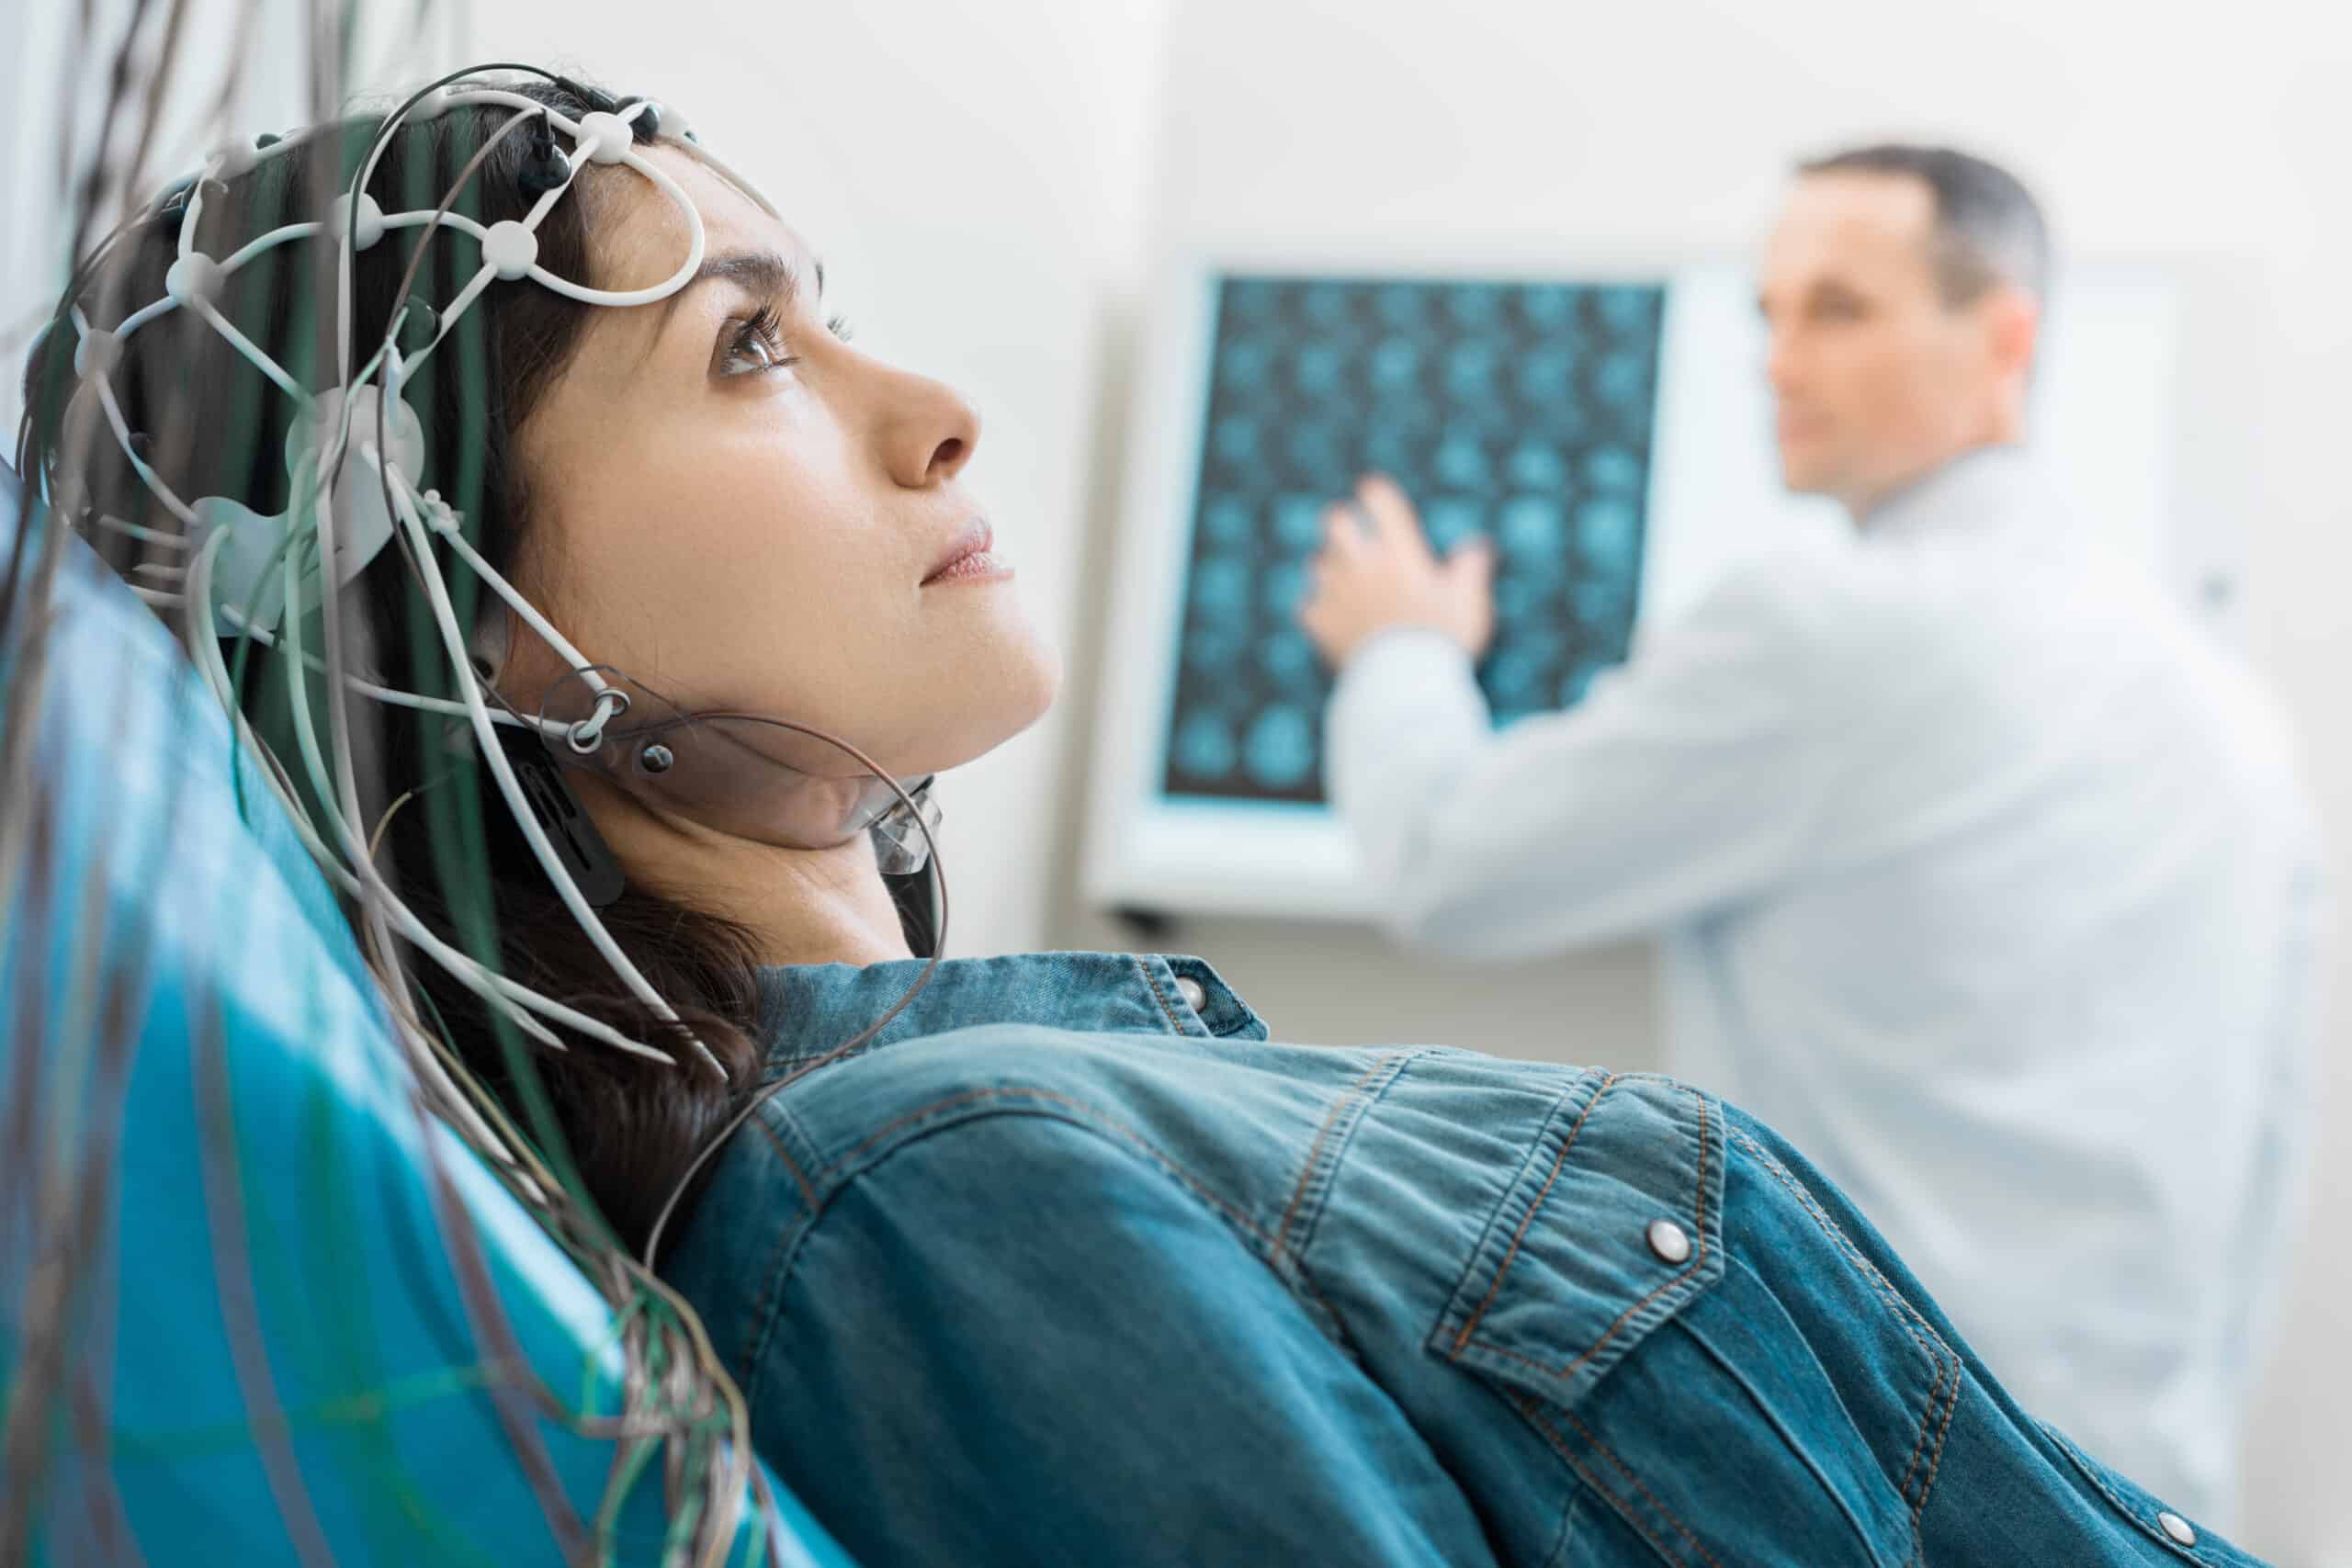 Artificial intelligence with targeted electrical brain stimulation may help relieve depression.